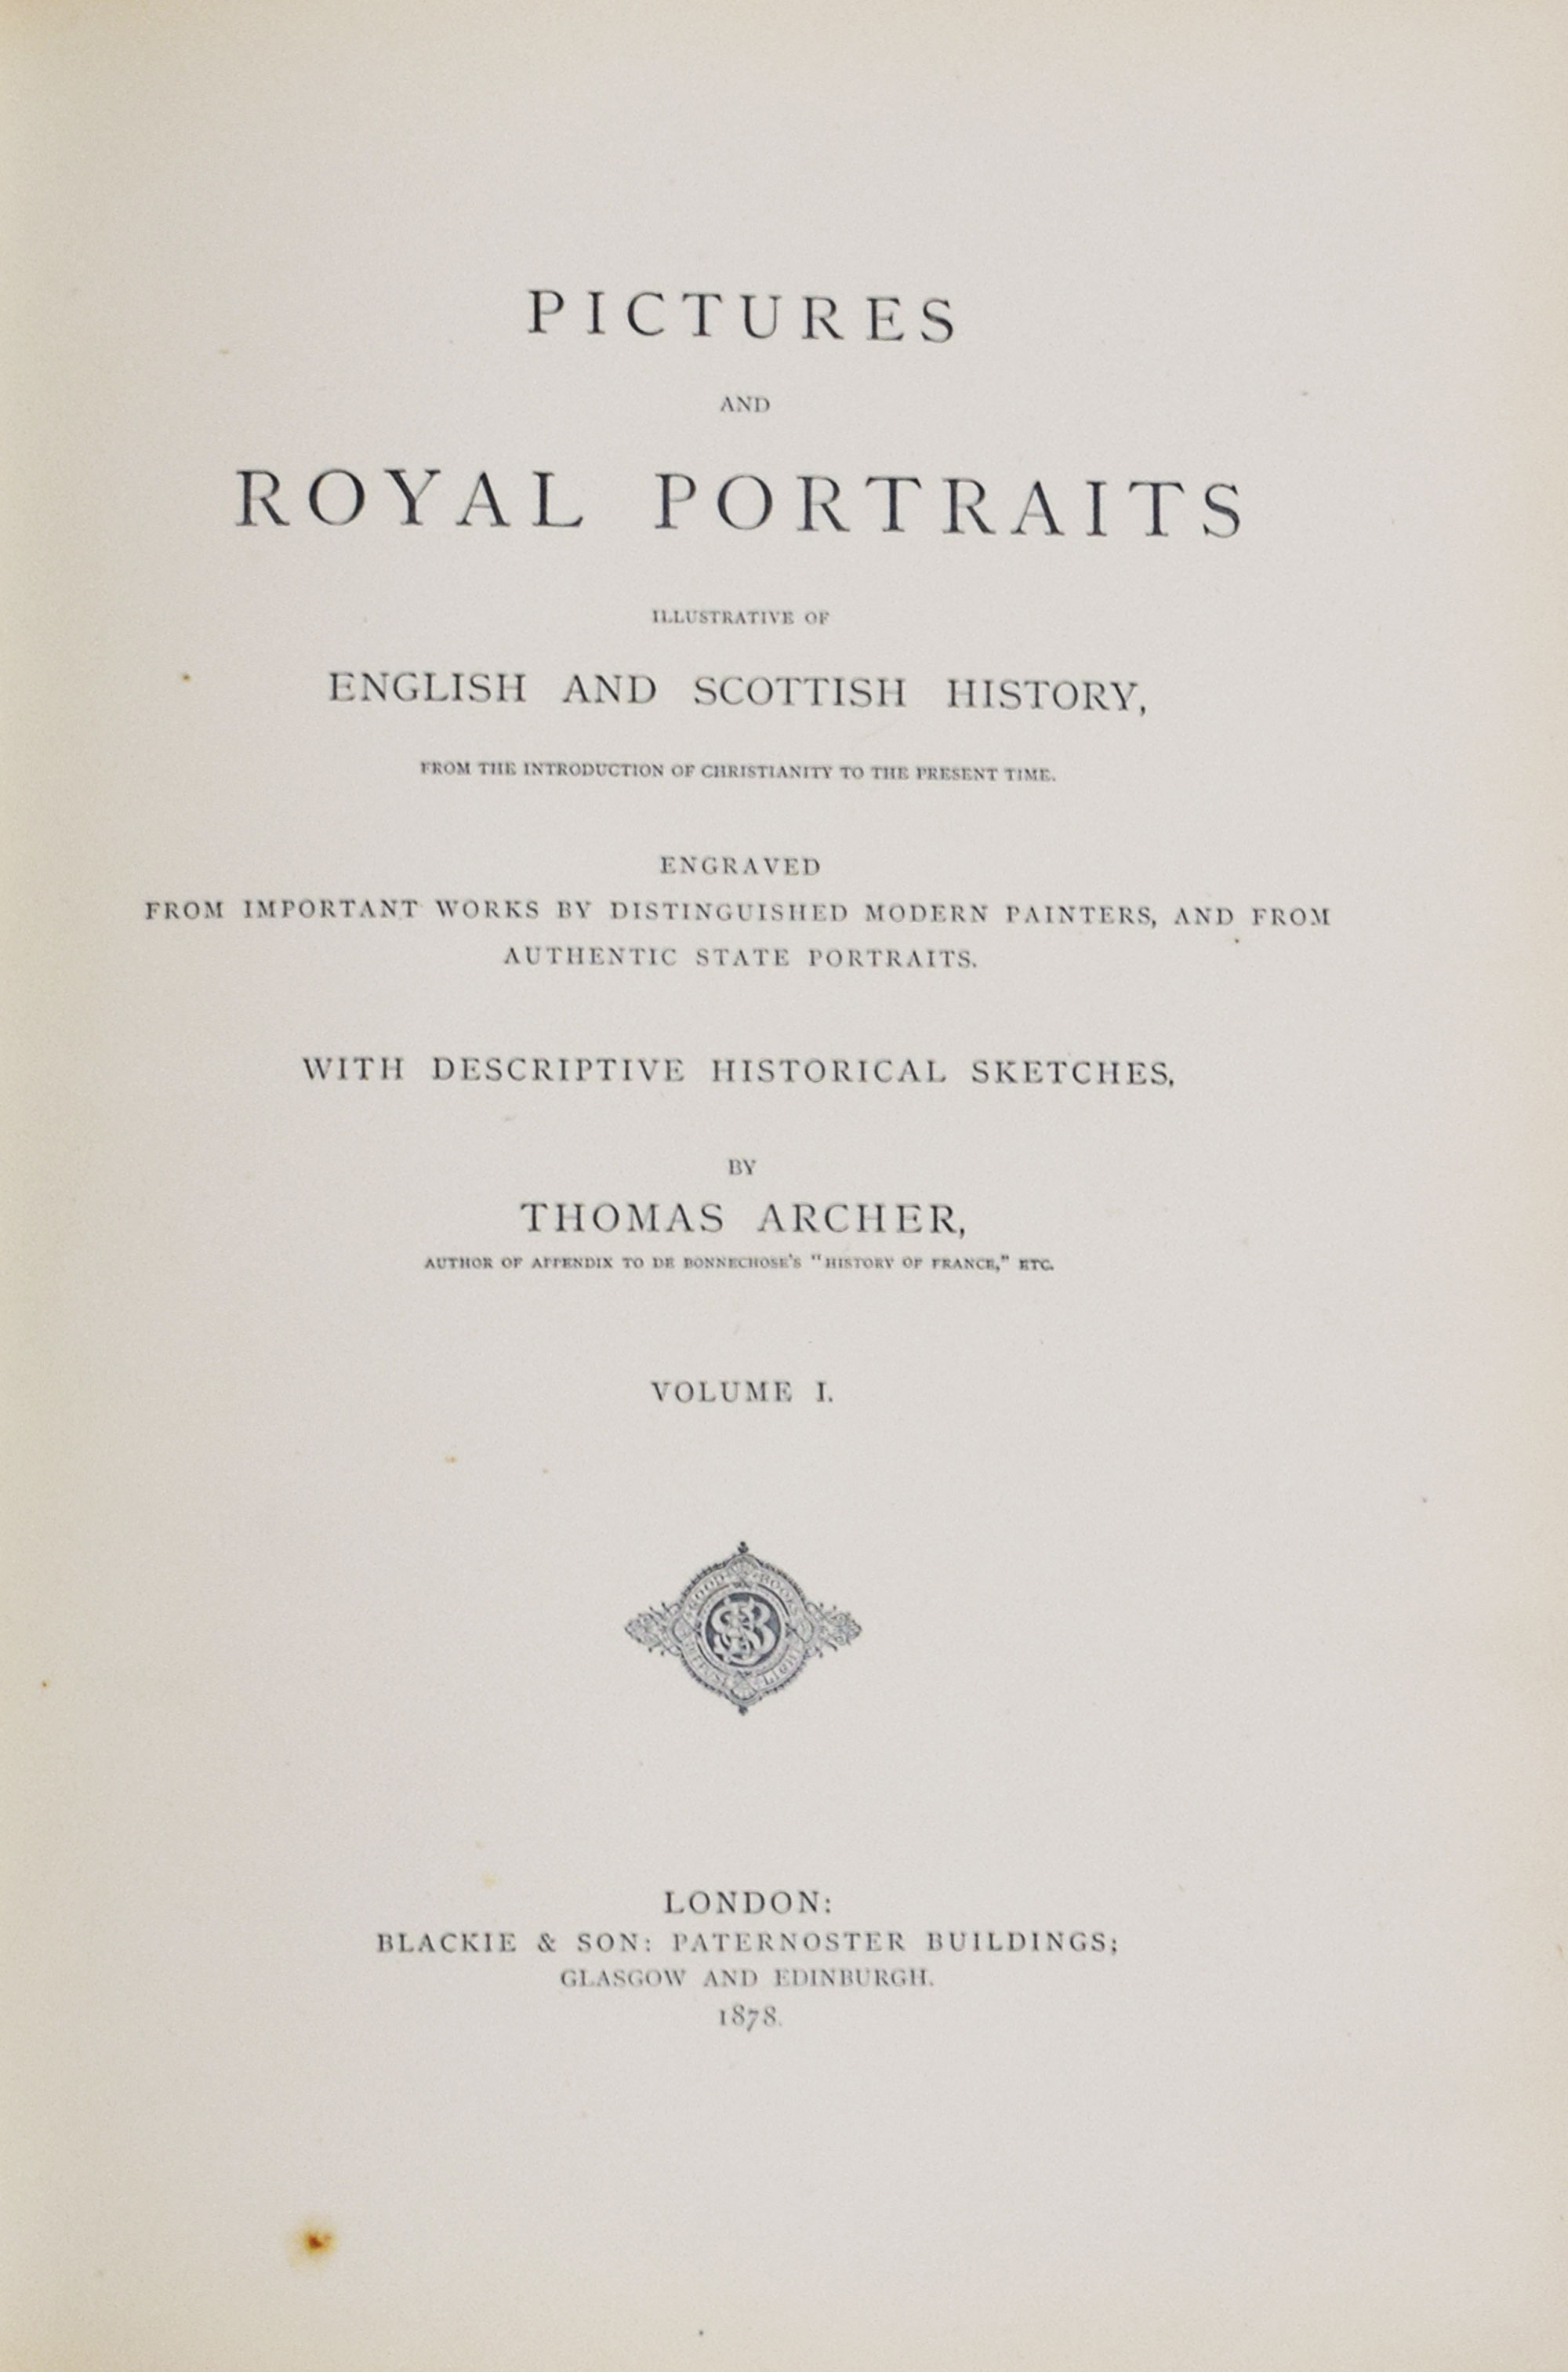 Pictures and Royal Portraits Illustrative of English and Scottish History from the Introduction of Christianity to the Present Time with Descriptive Historical Sketches. 2 volume set.